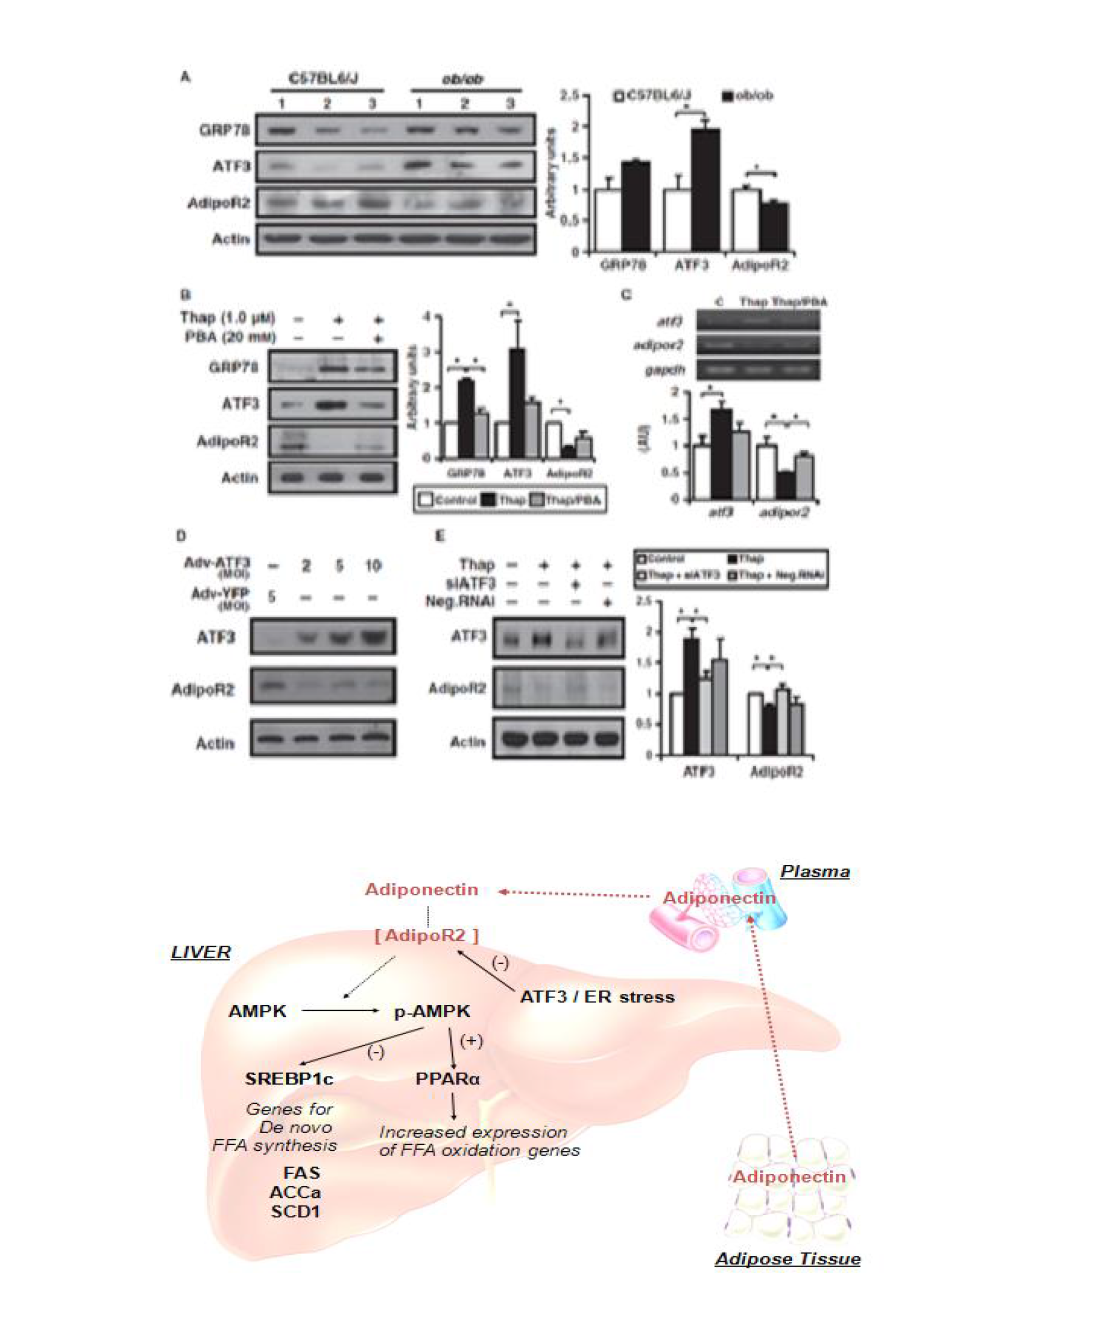 Down-regulation of AsipoR2 with up-regulation of ATF3 expression under increased ER stress conditions